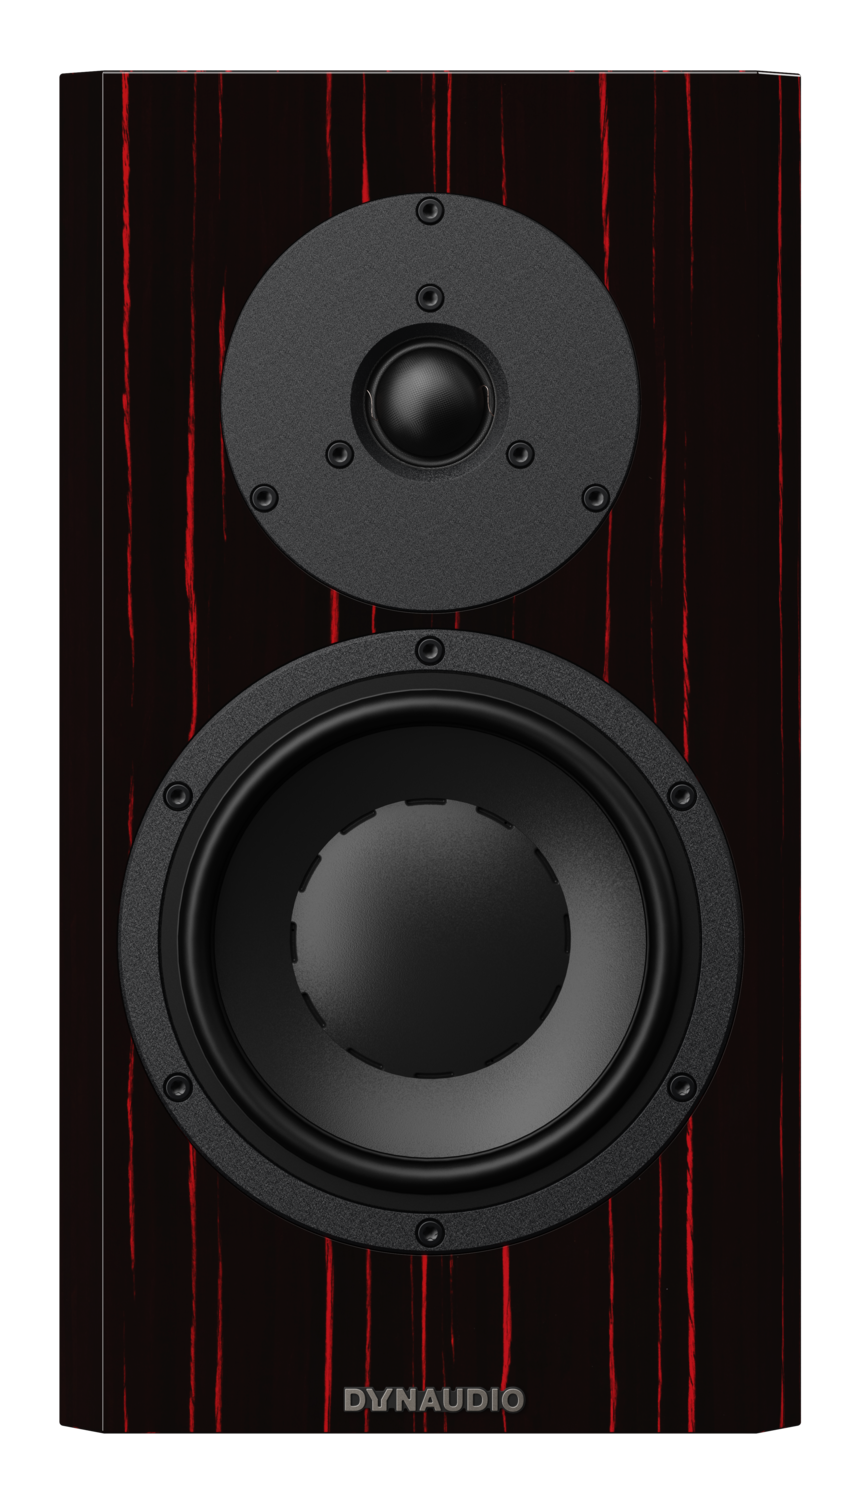 dynaudio special forty_blackvine_front.png